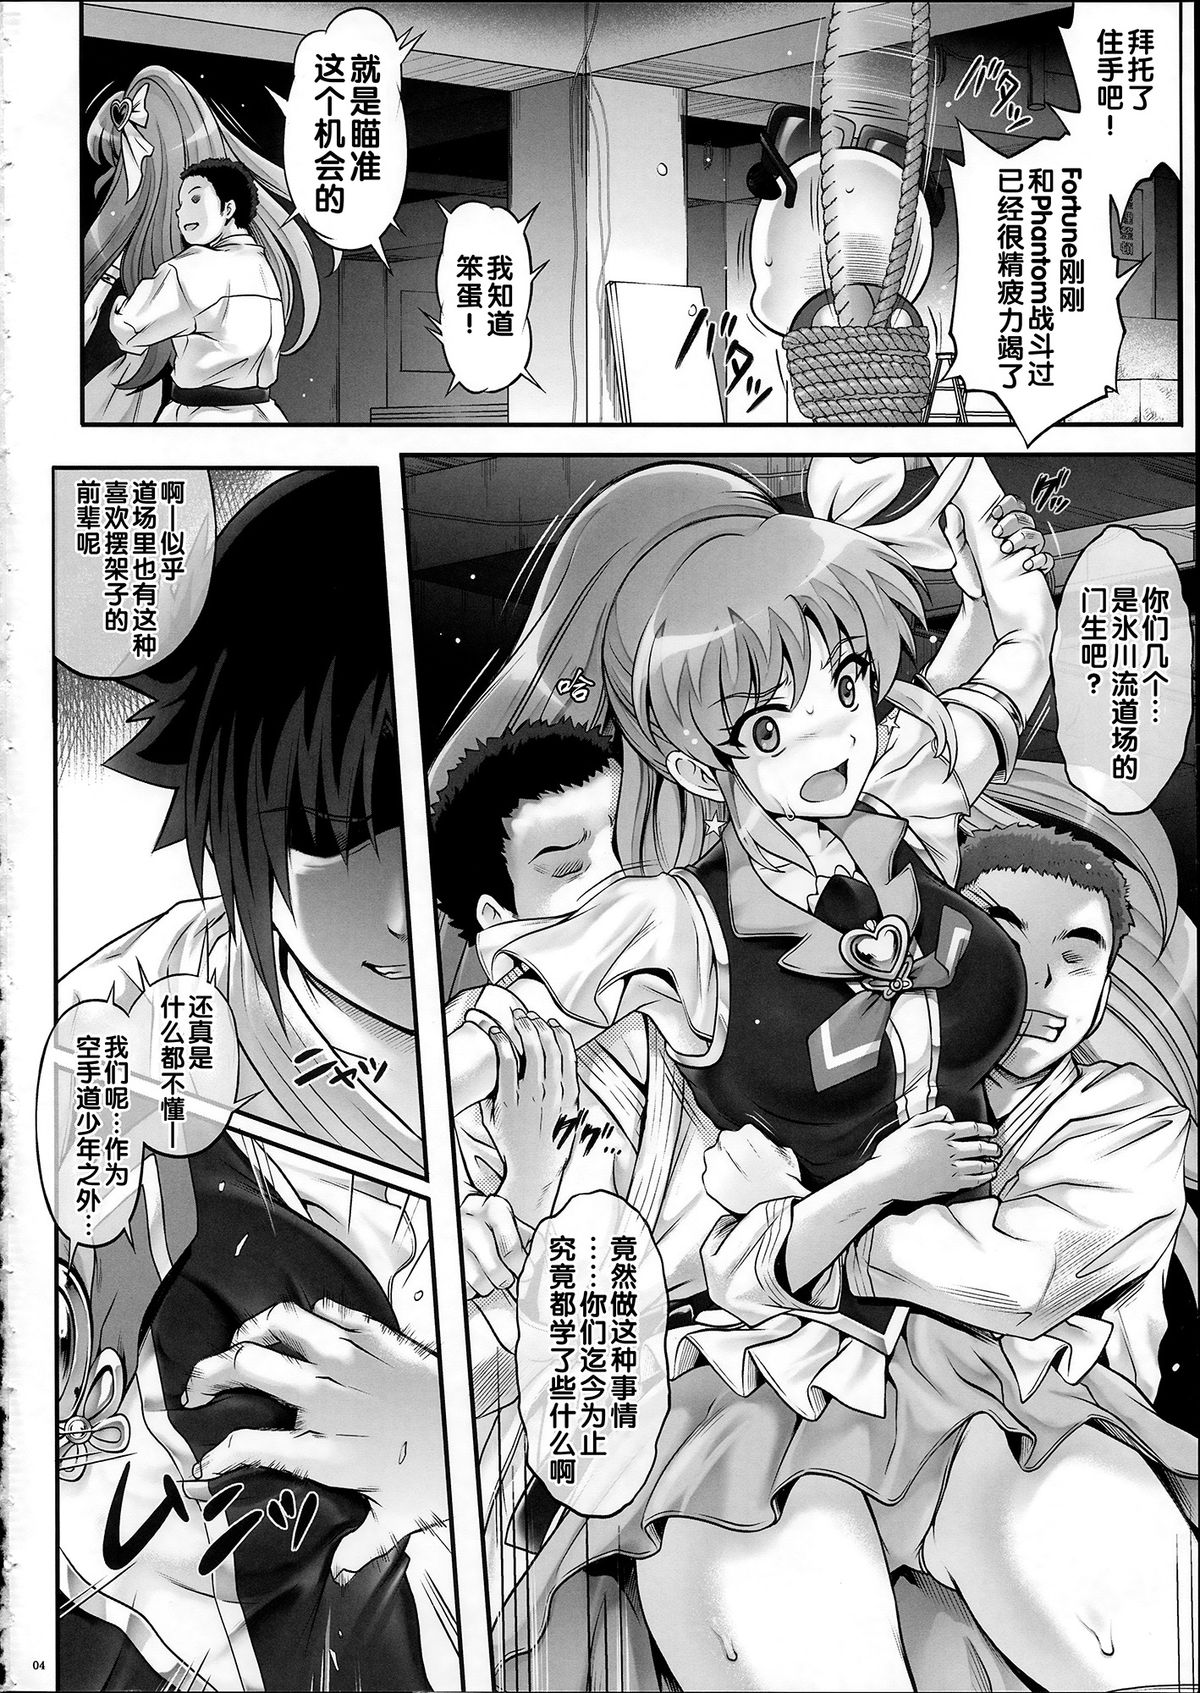 (C86) [Cyclone (Izumi, Reizei)] T-21 Sai Aaaark (HappinessCharge Precure!) [Chinese] page 4 full